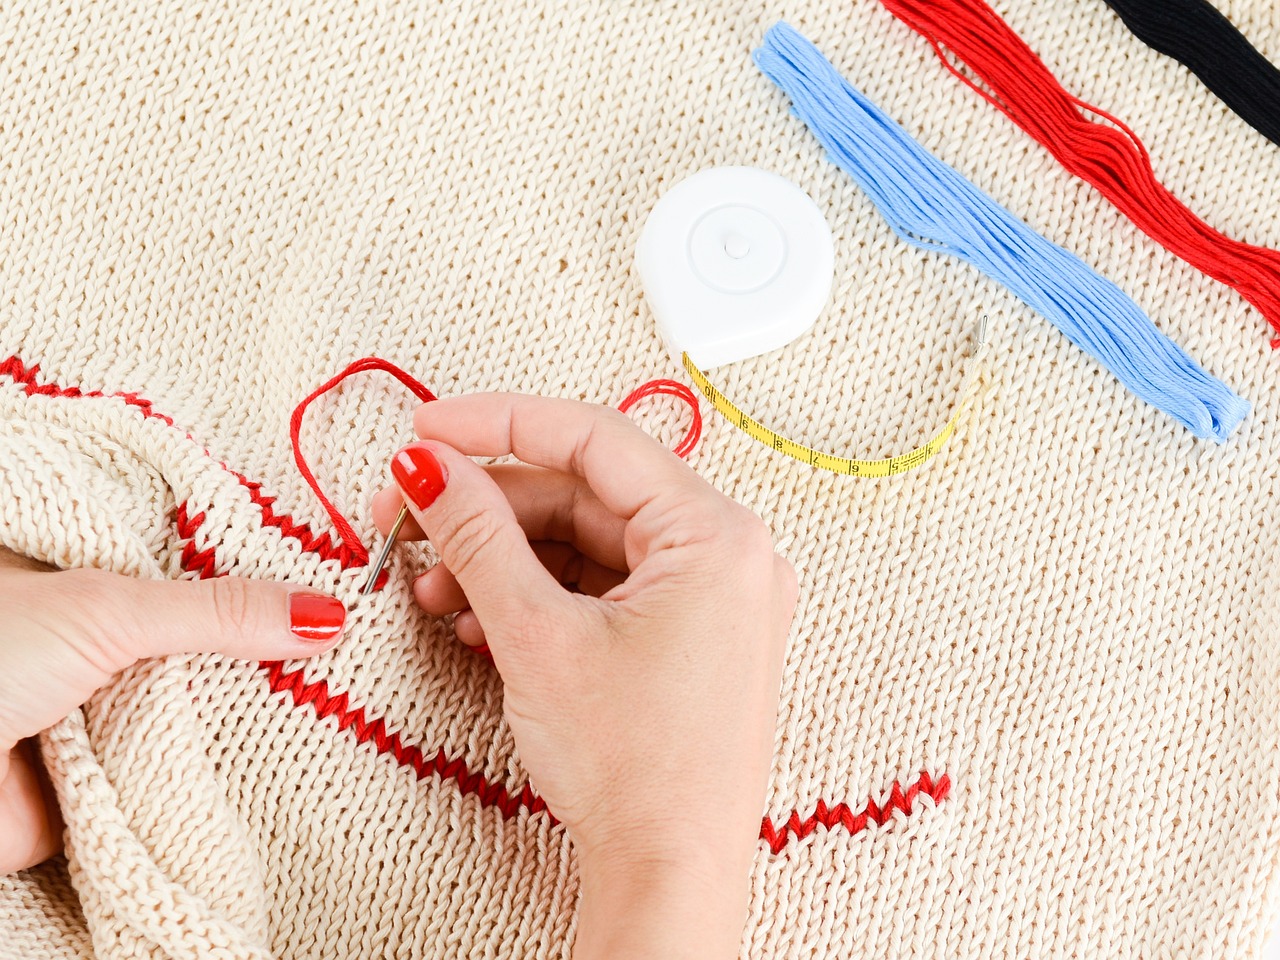 Course Image for 7551G224 Craft:Simple Embroidery (Workshop)